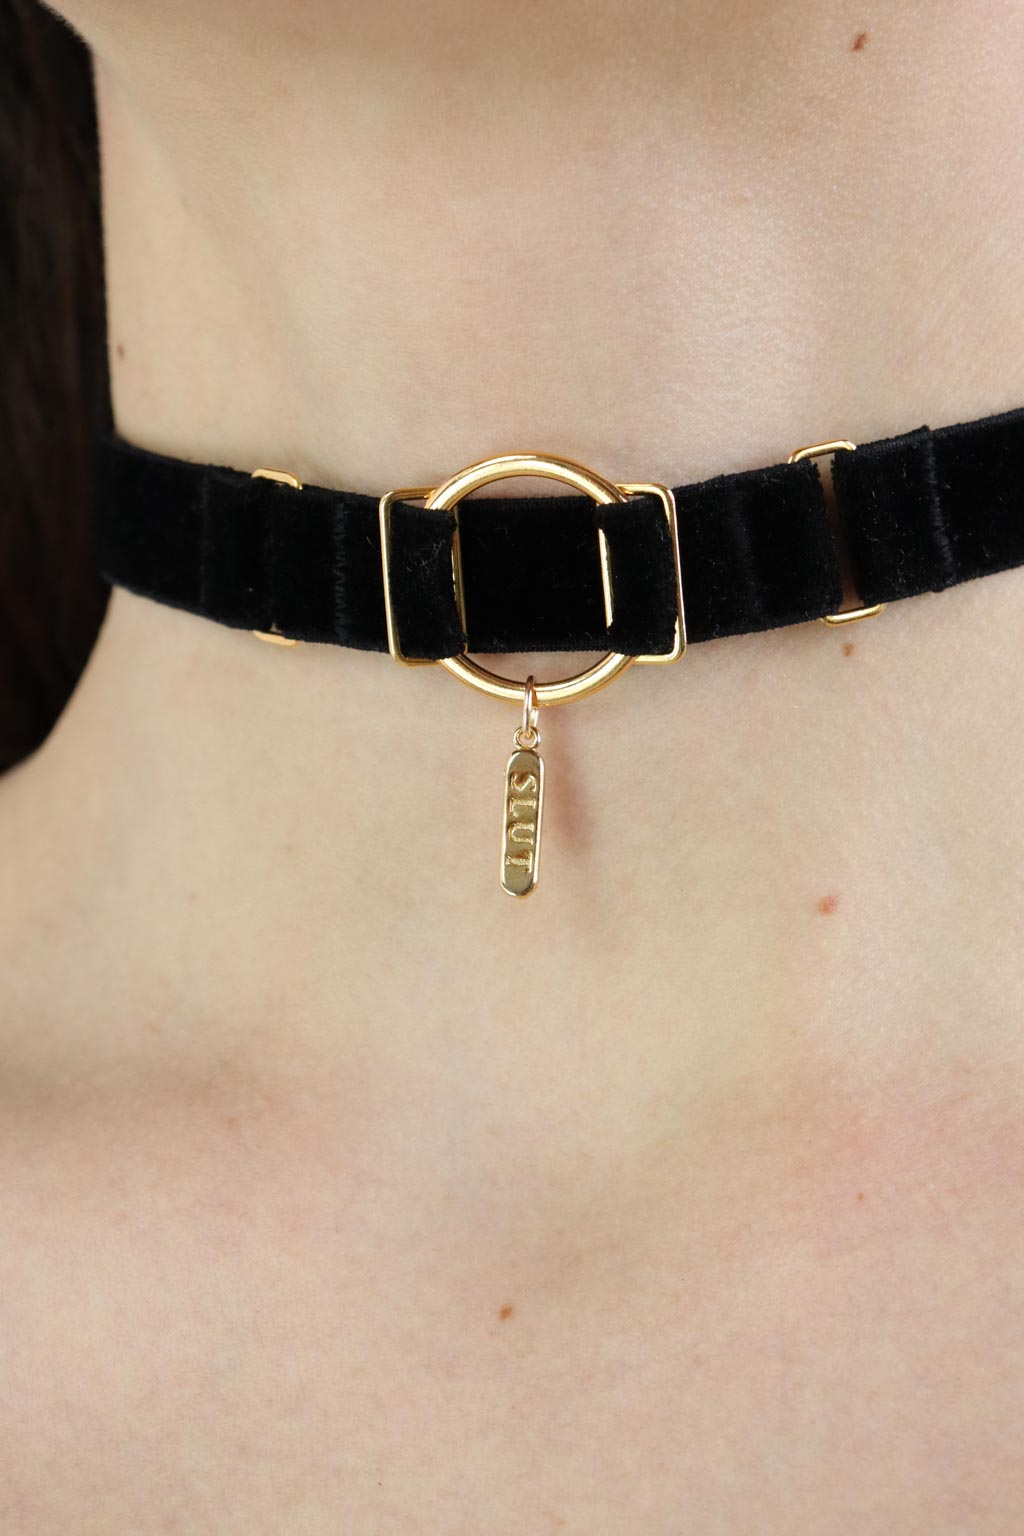 Close-up of a woman wearing an O-ring black velvet choker with a gold charm with 